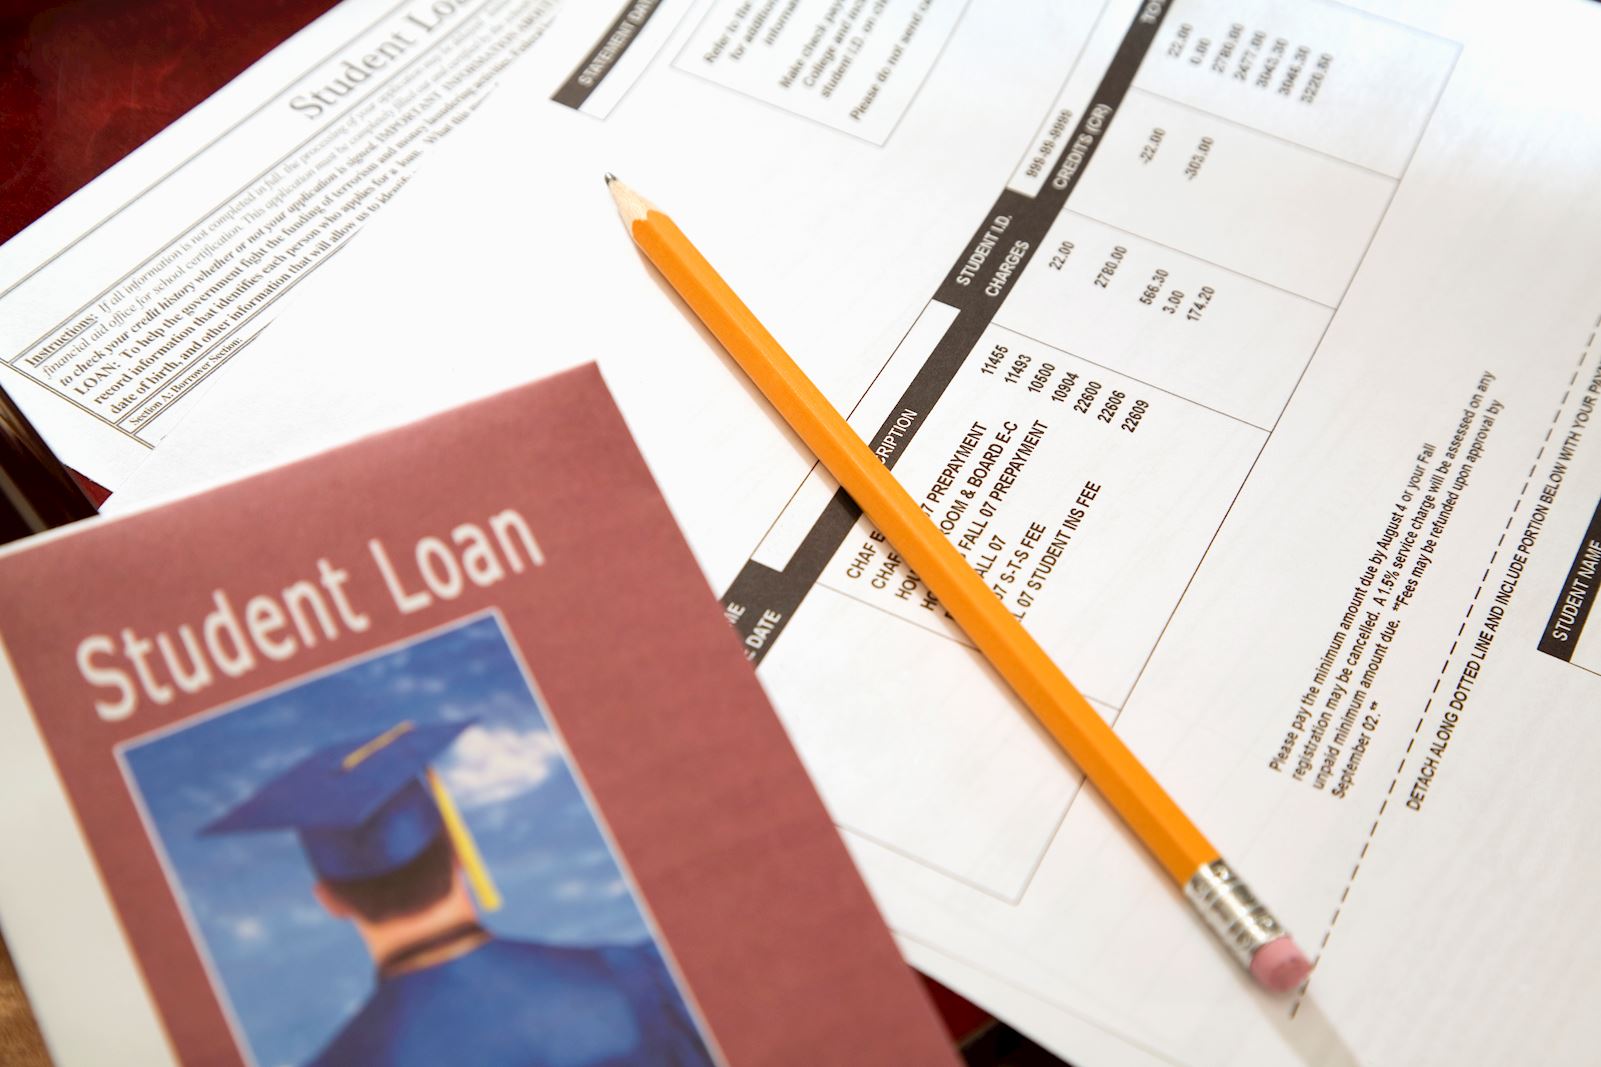 Don't let financial constraints ruin your chances of getting into a good school. Check out our latest blog to learn more about the basics of private student loans.